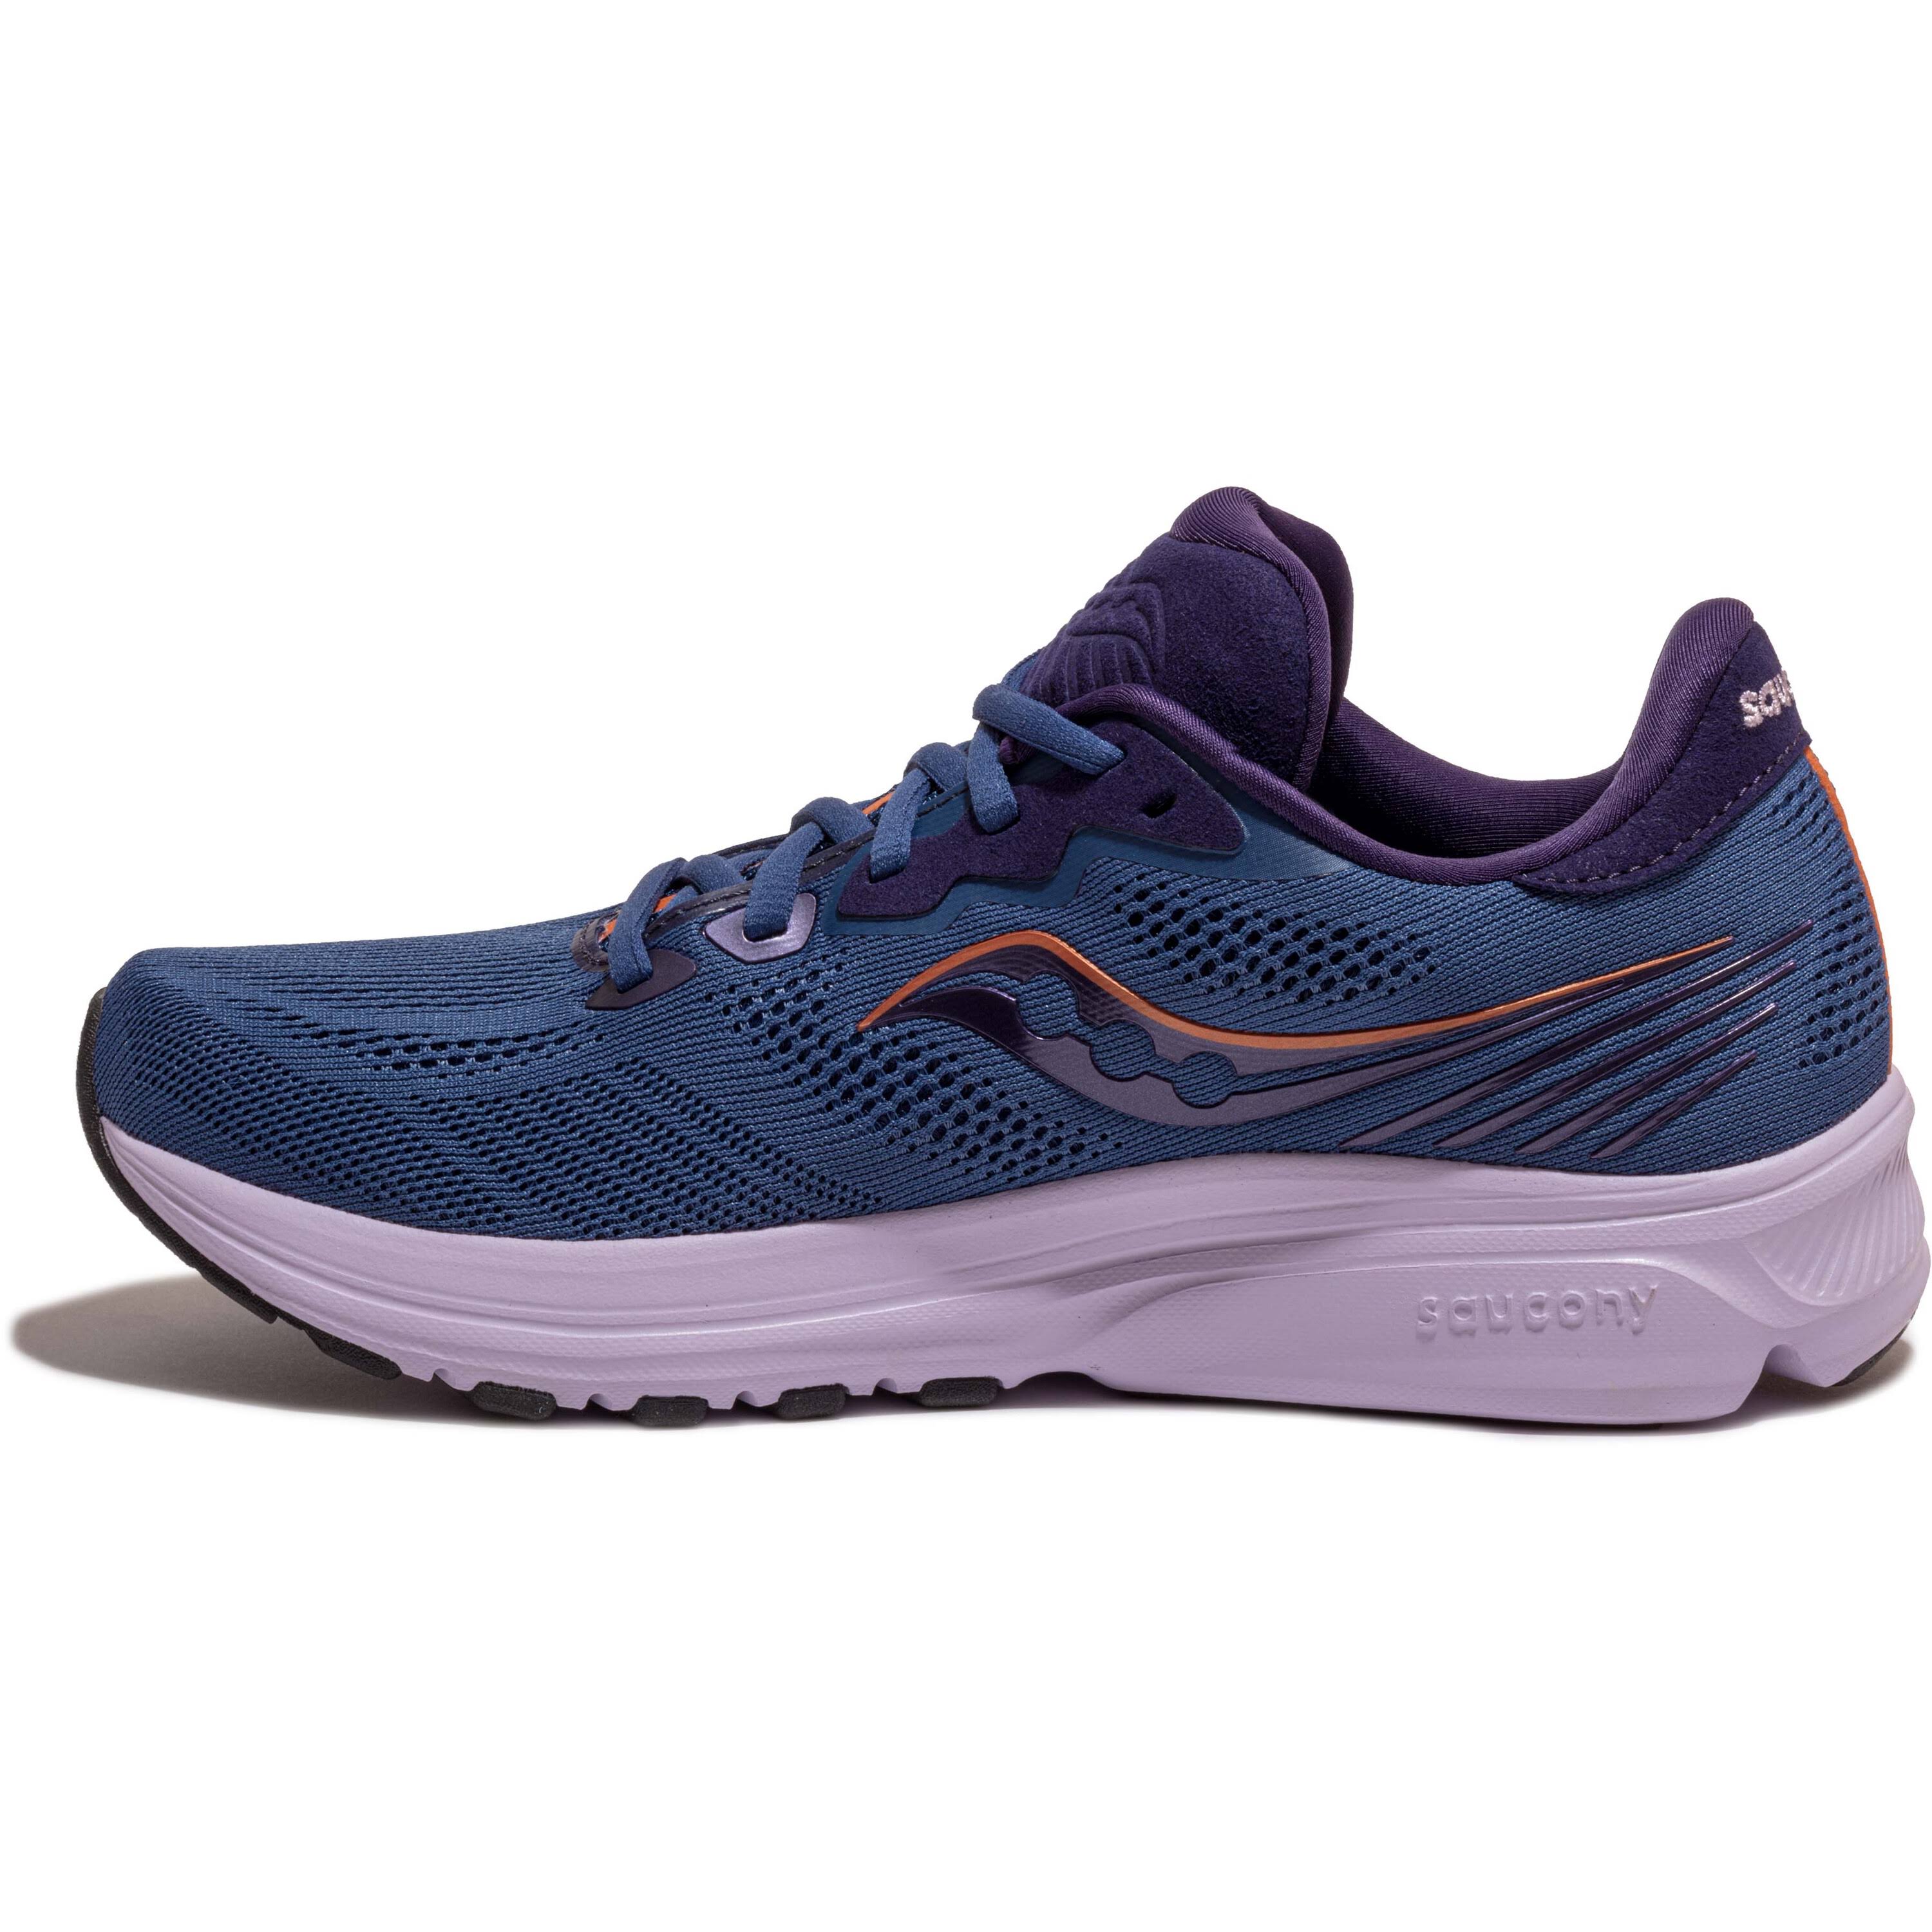 Saucony | Women's Ride 14 Running Shoes Midnight/Copper | 8